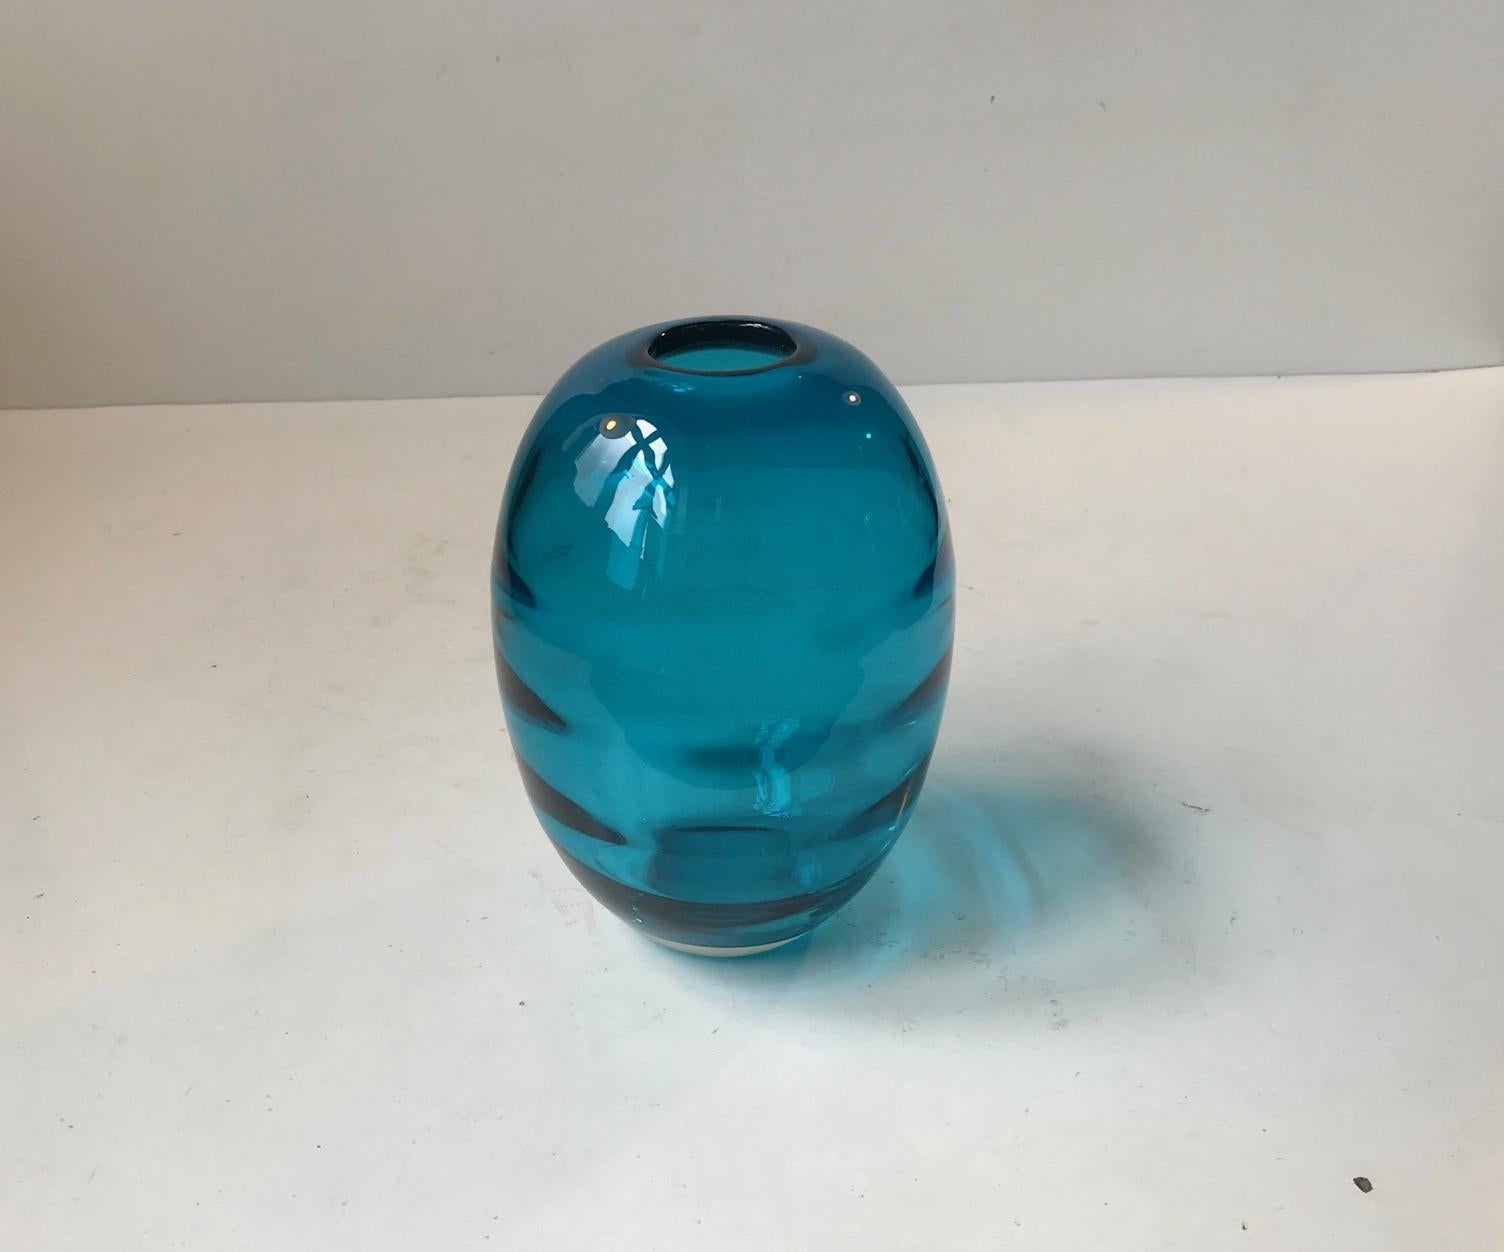 A handblown turquoise glass vase manufactured by Holmegaard in Denmark during the 1950s. Beautiful deep turquoise in color and decorated internally with horizontal optical stripes that highlights the ovoid shape. Is has no signature but was probably